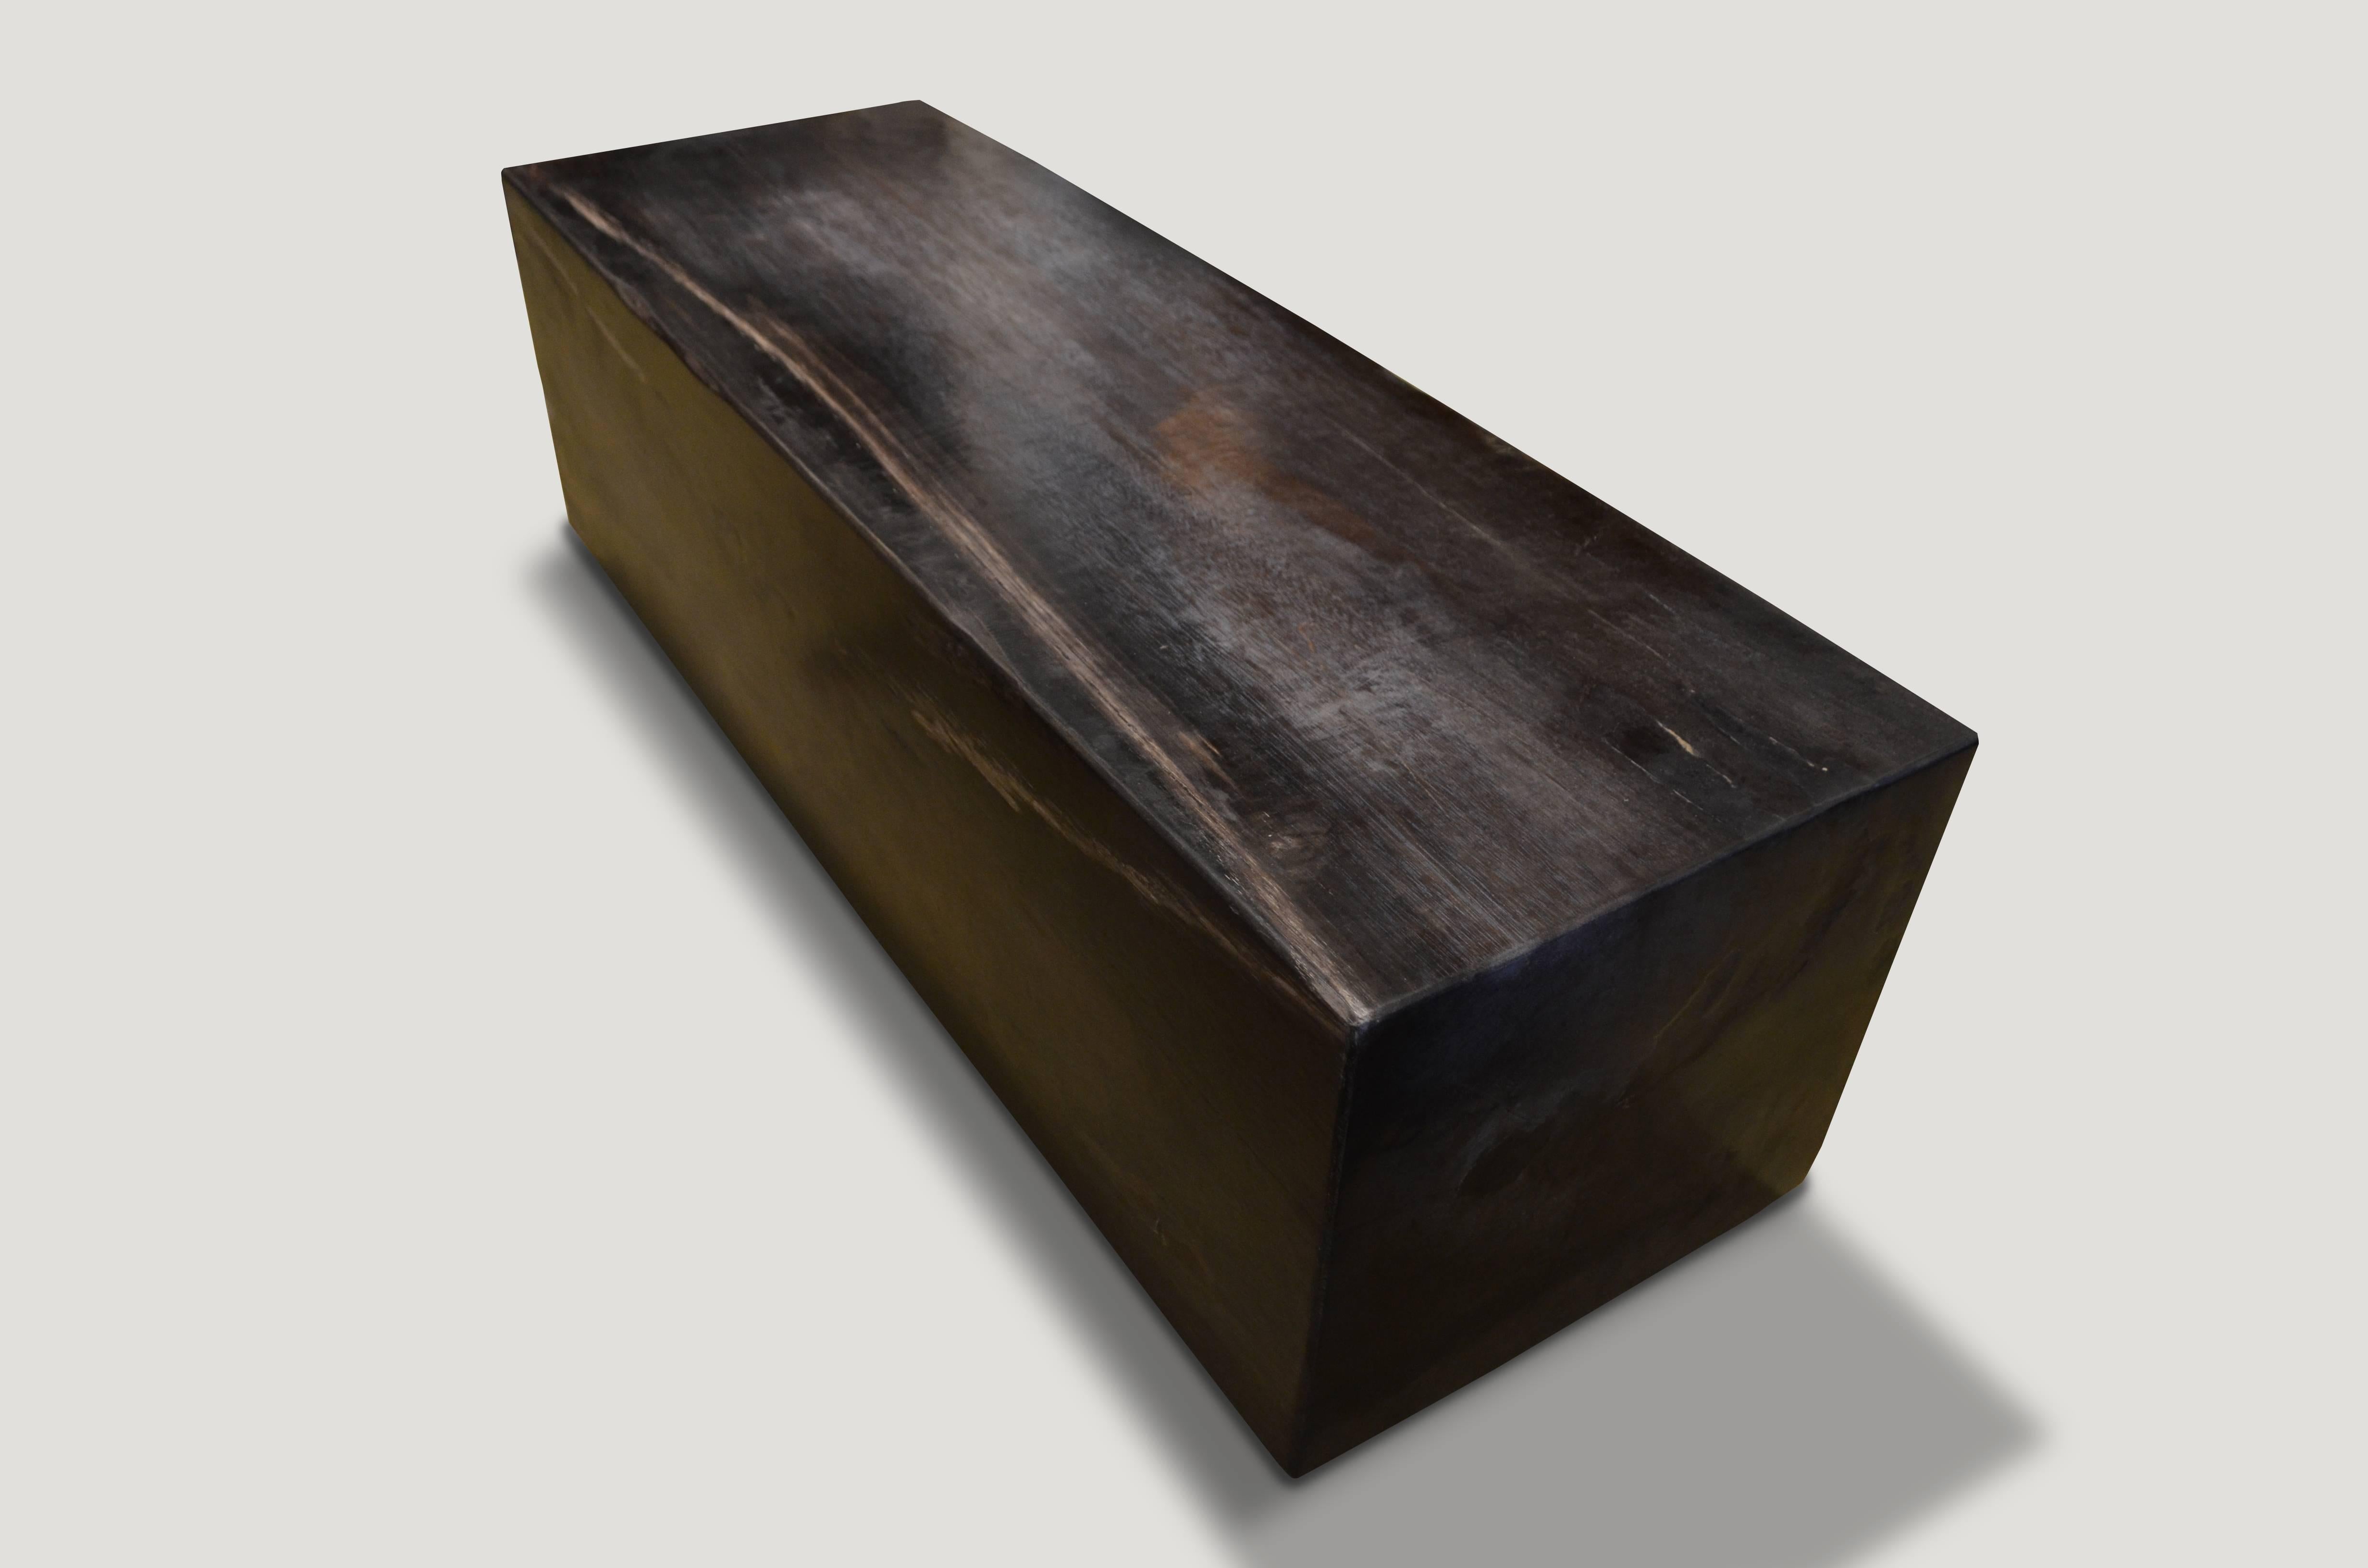 High quality super smooth petrified wood log bench. Stunning charcoal grey, black and white tones make this an impressive piece for any space. Floating on two espresso stained wooden bases which can be modified for a different height. Each side is